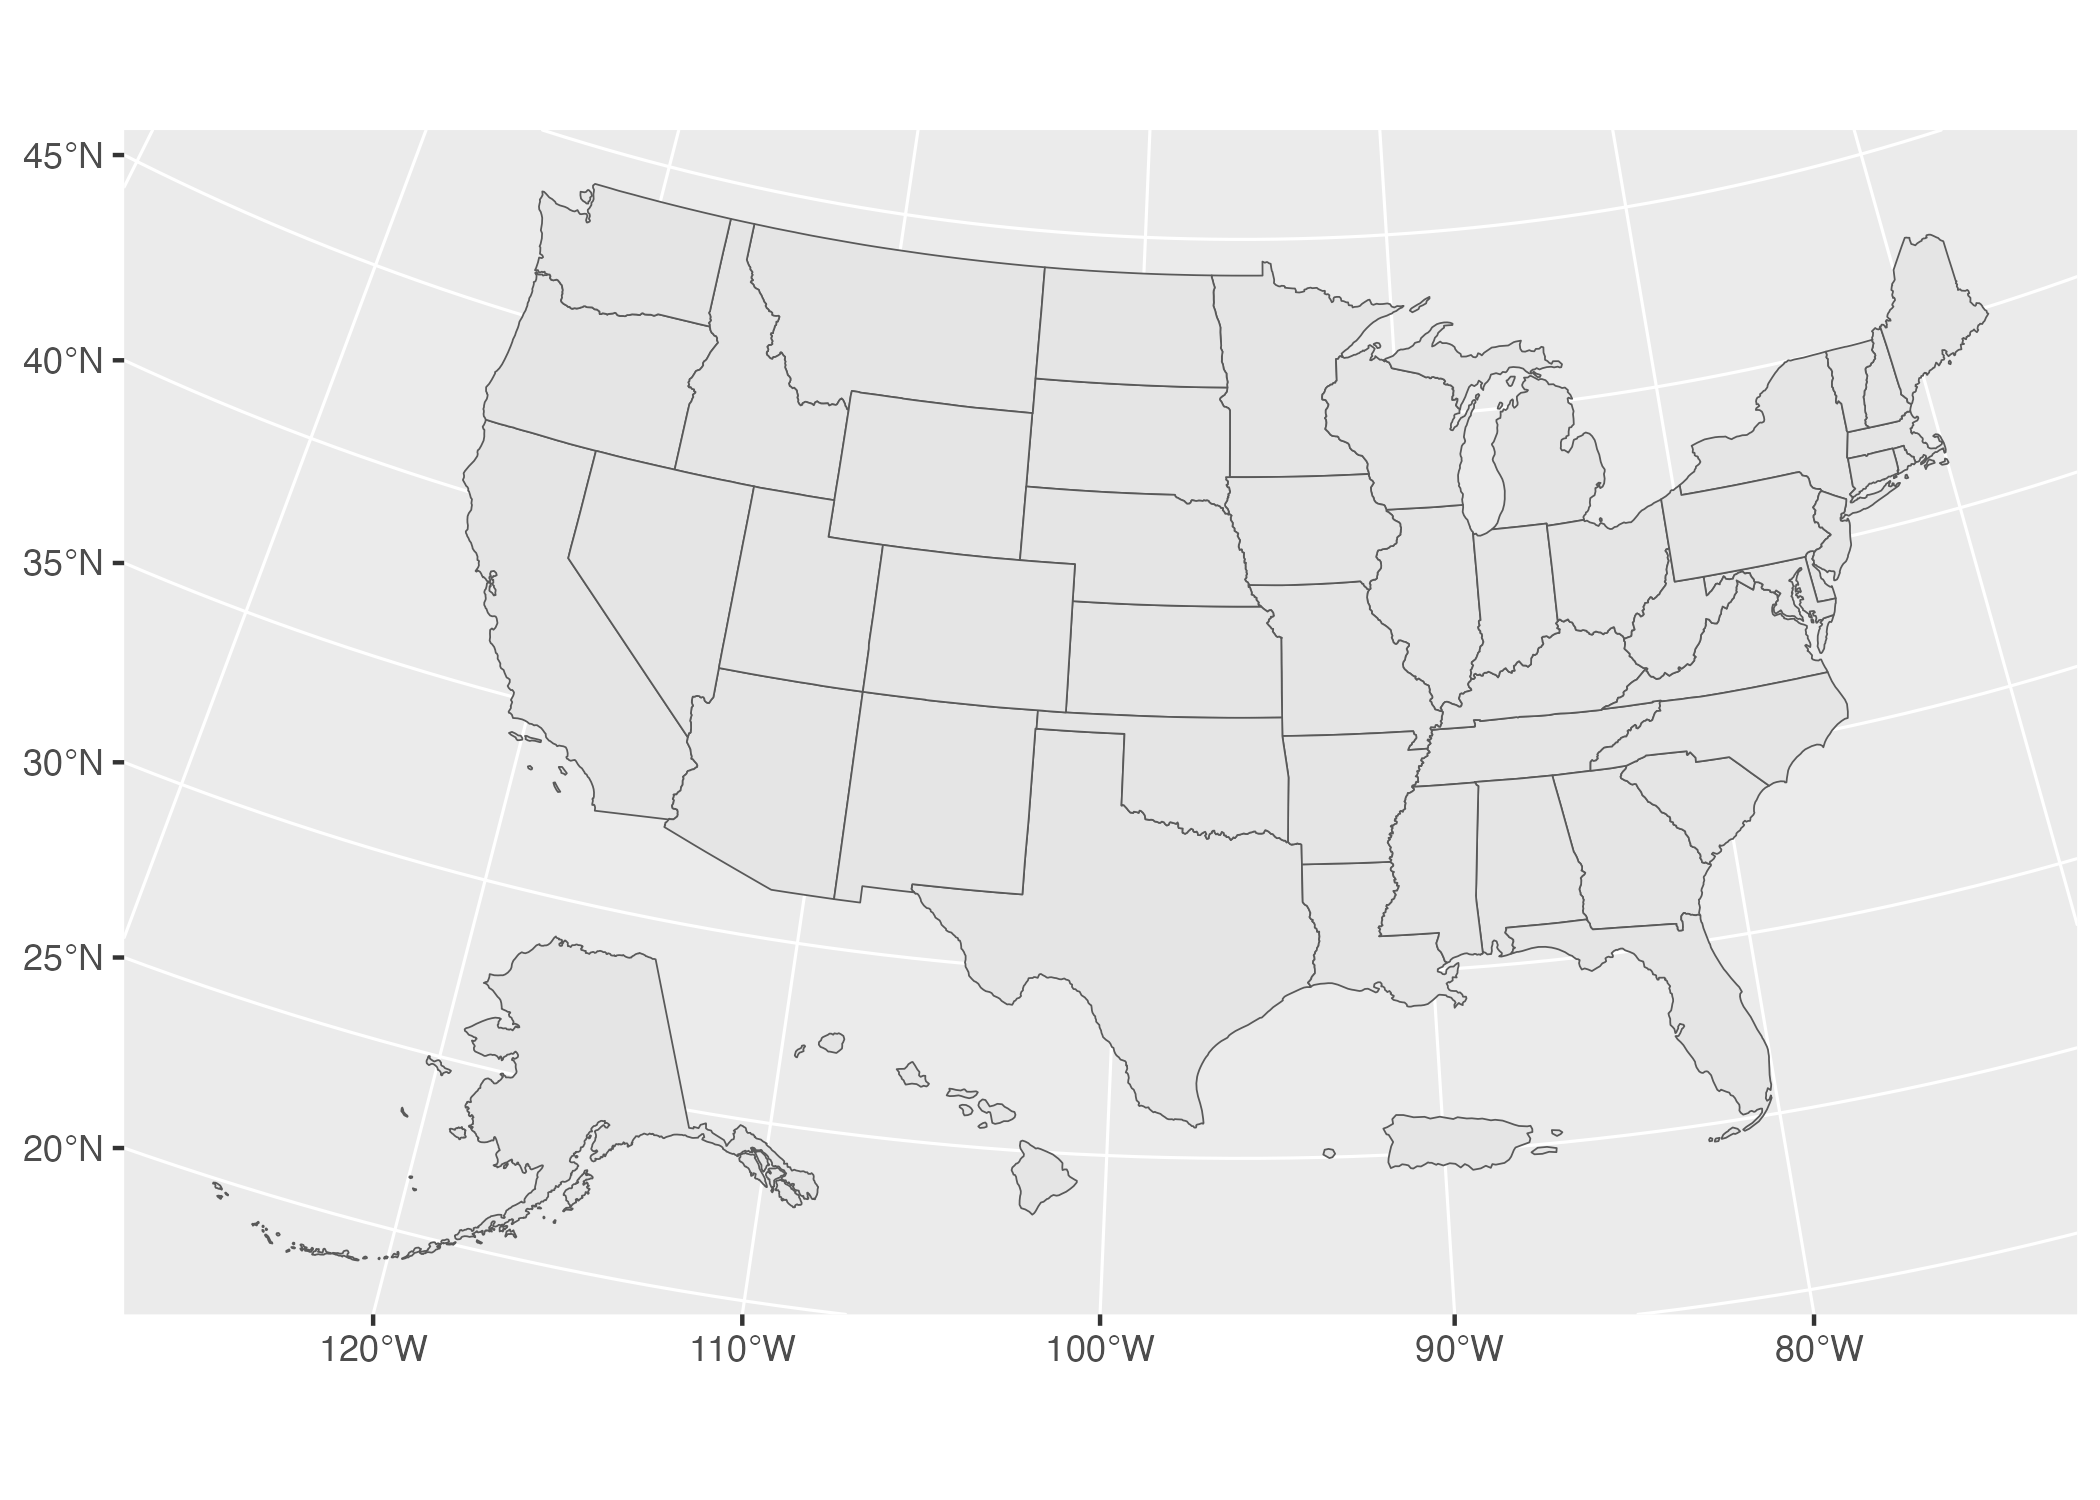 A map of the United States made with data from the tigris package